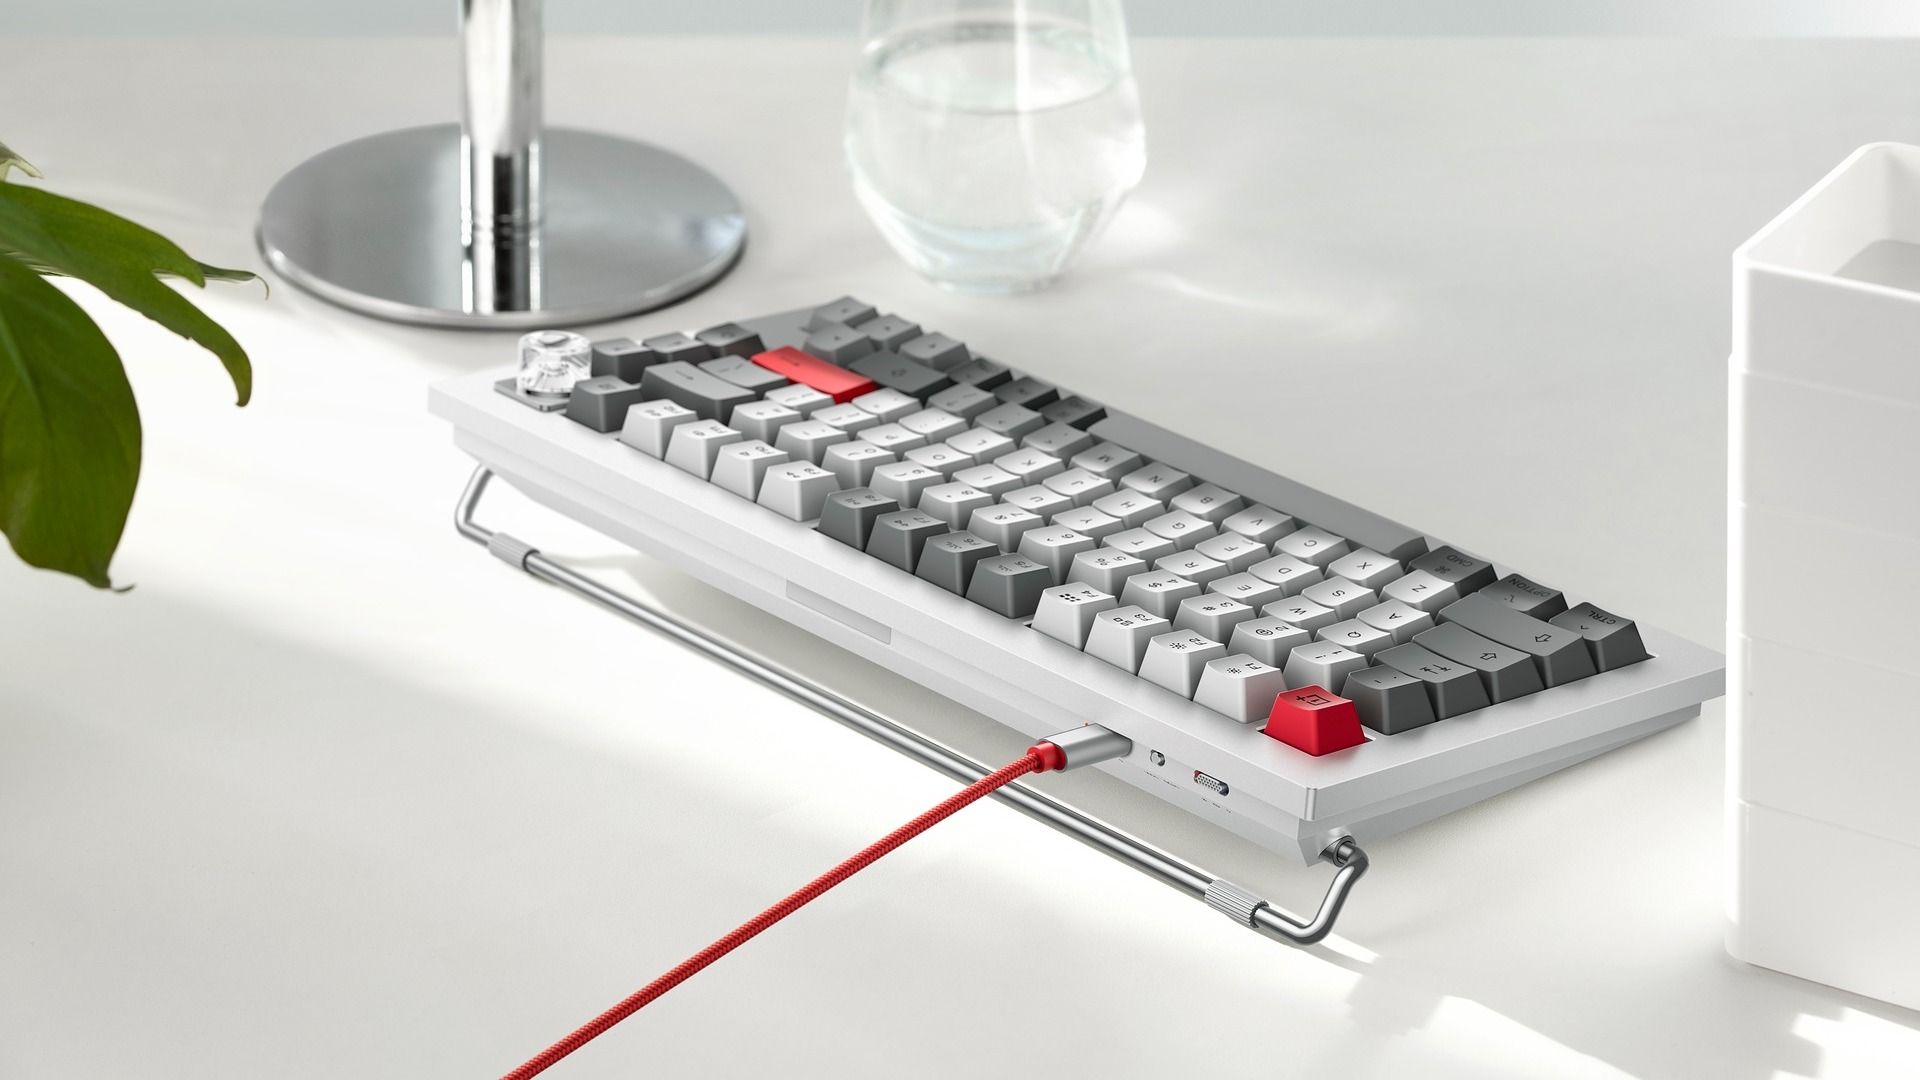 #You Can Now Buy the First OnePlus Mechanical Keyboard